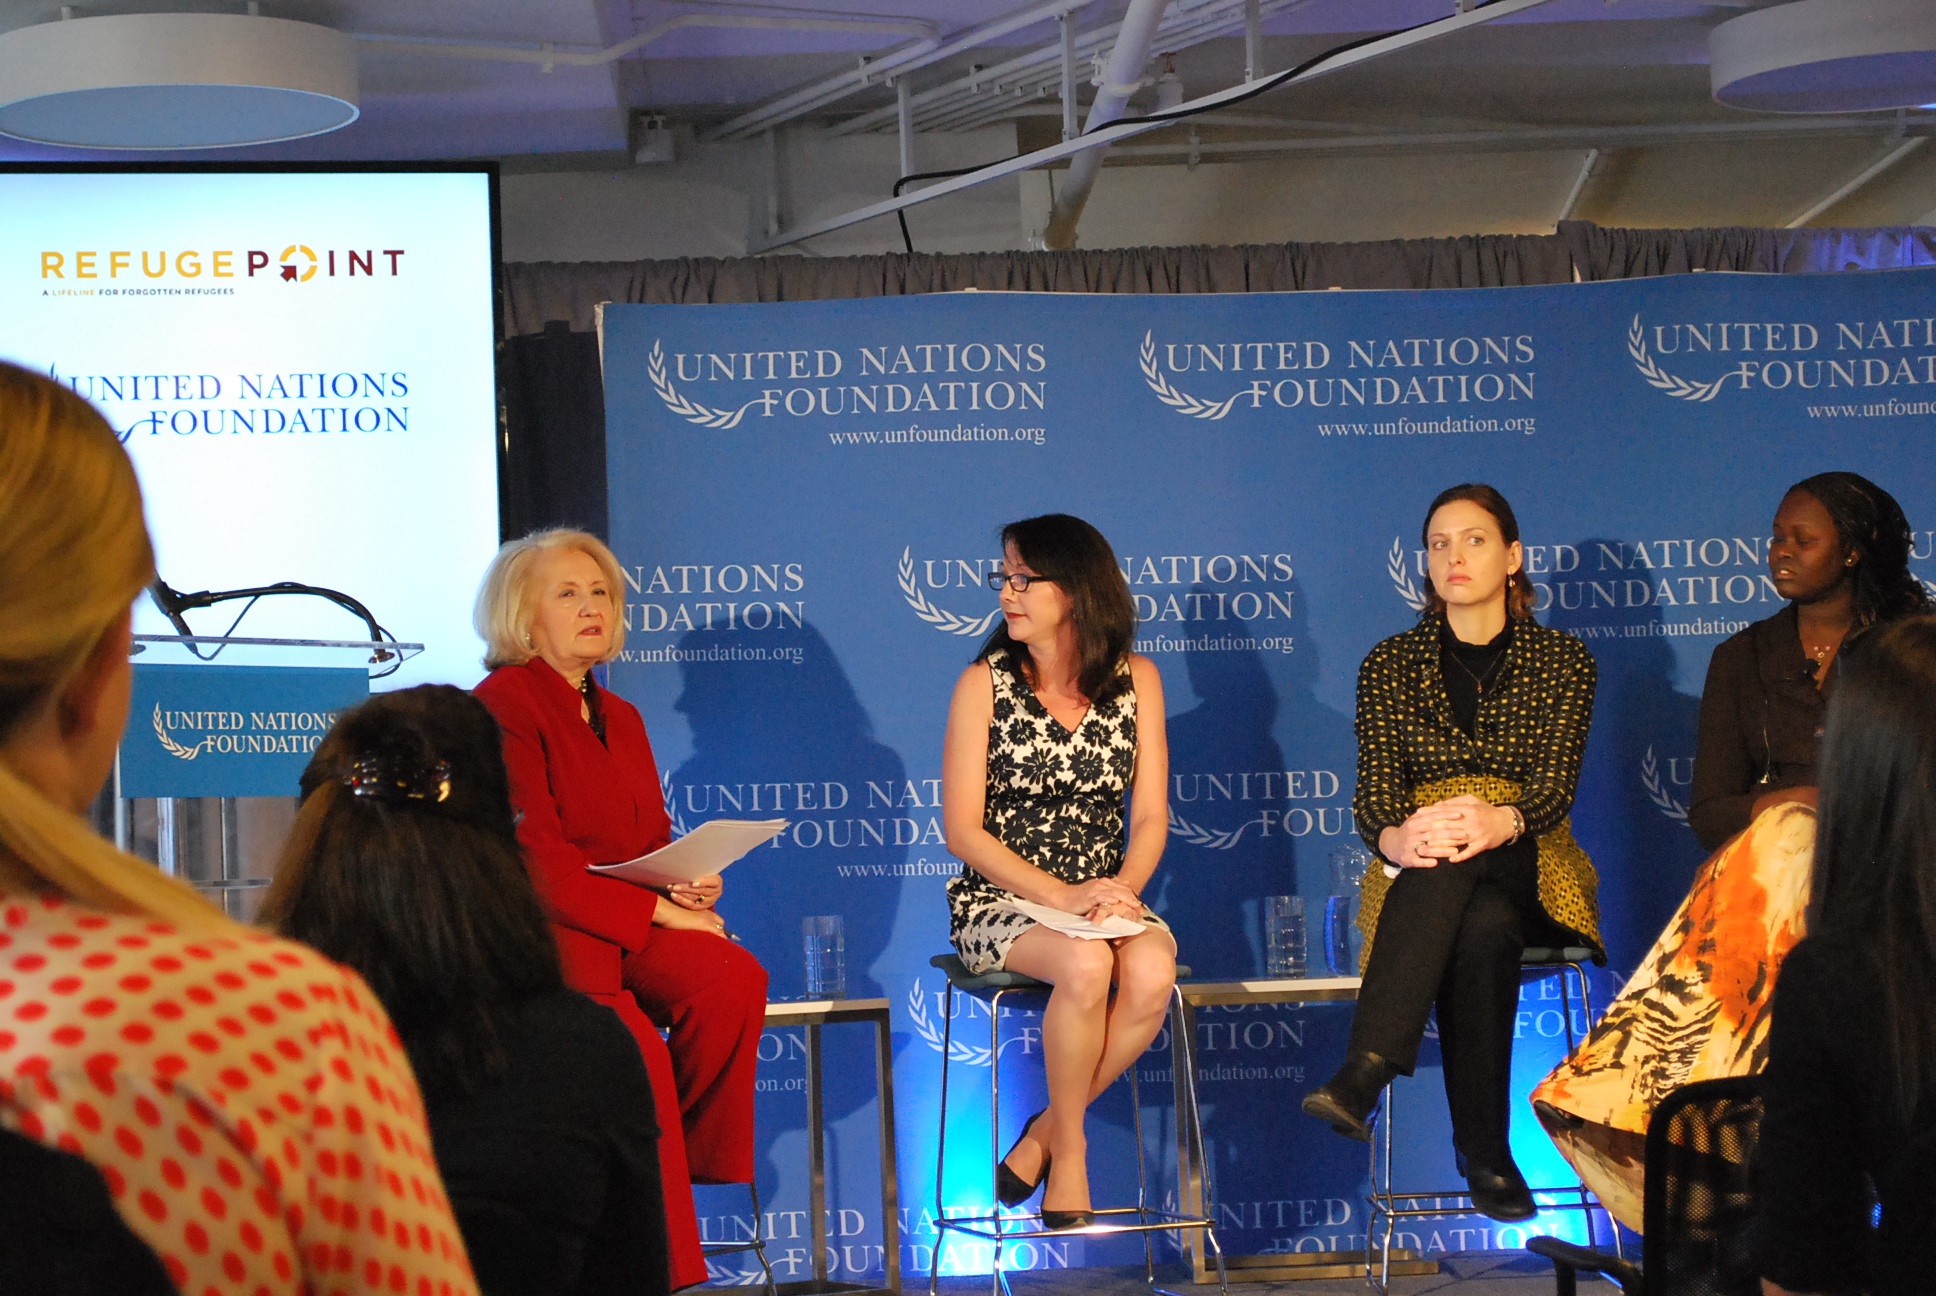 UN Foundation event Women in Fragile States with panel and moderator. Photo: Tonya Fitzpatrick